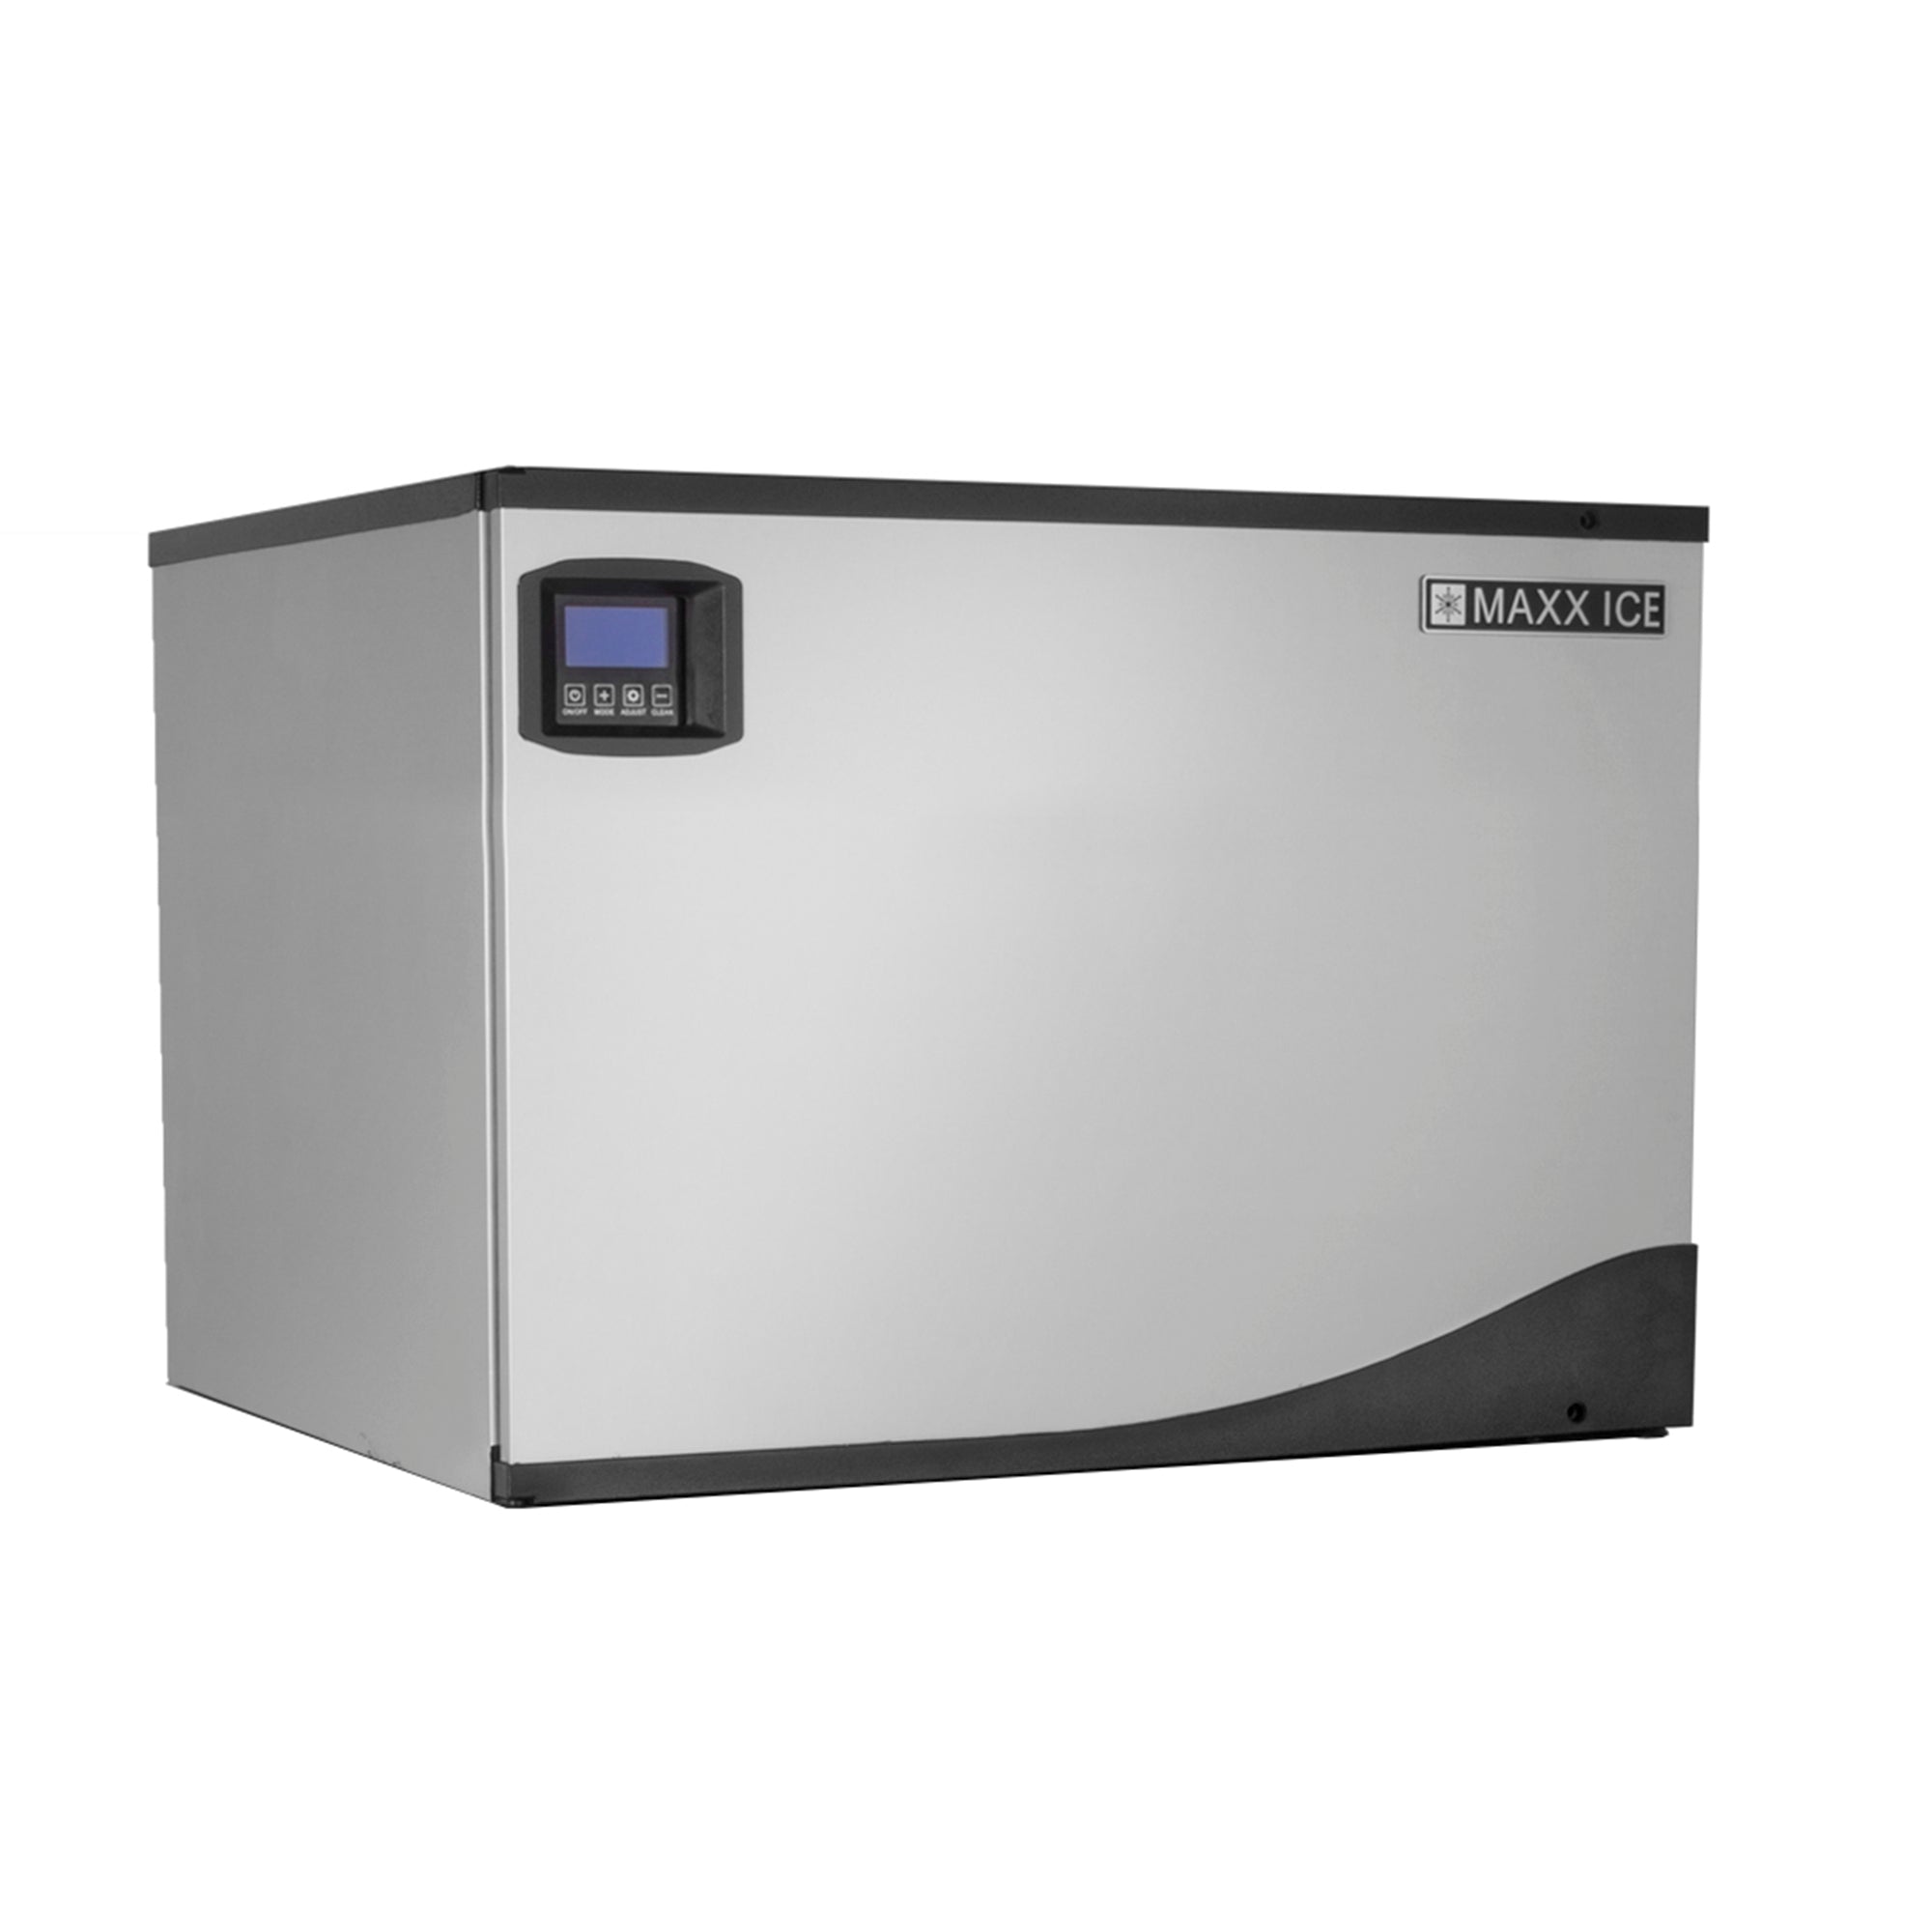 Maxx Ice - MIM370N, Maxx Ice Intelligent Series Modular Ice Machine, 30"W, 373 lbs, Full Dice Ice Cubes, Energy Star Listed, in Stainless Steel